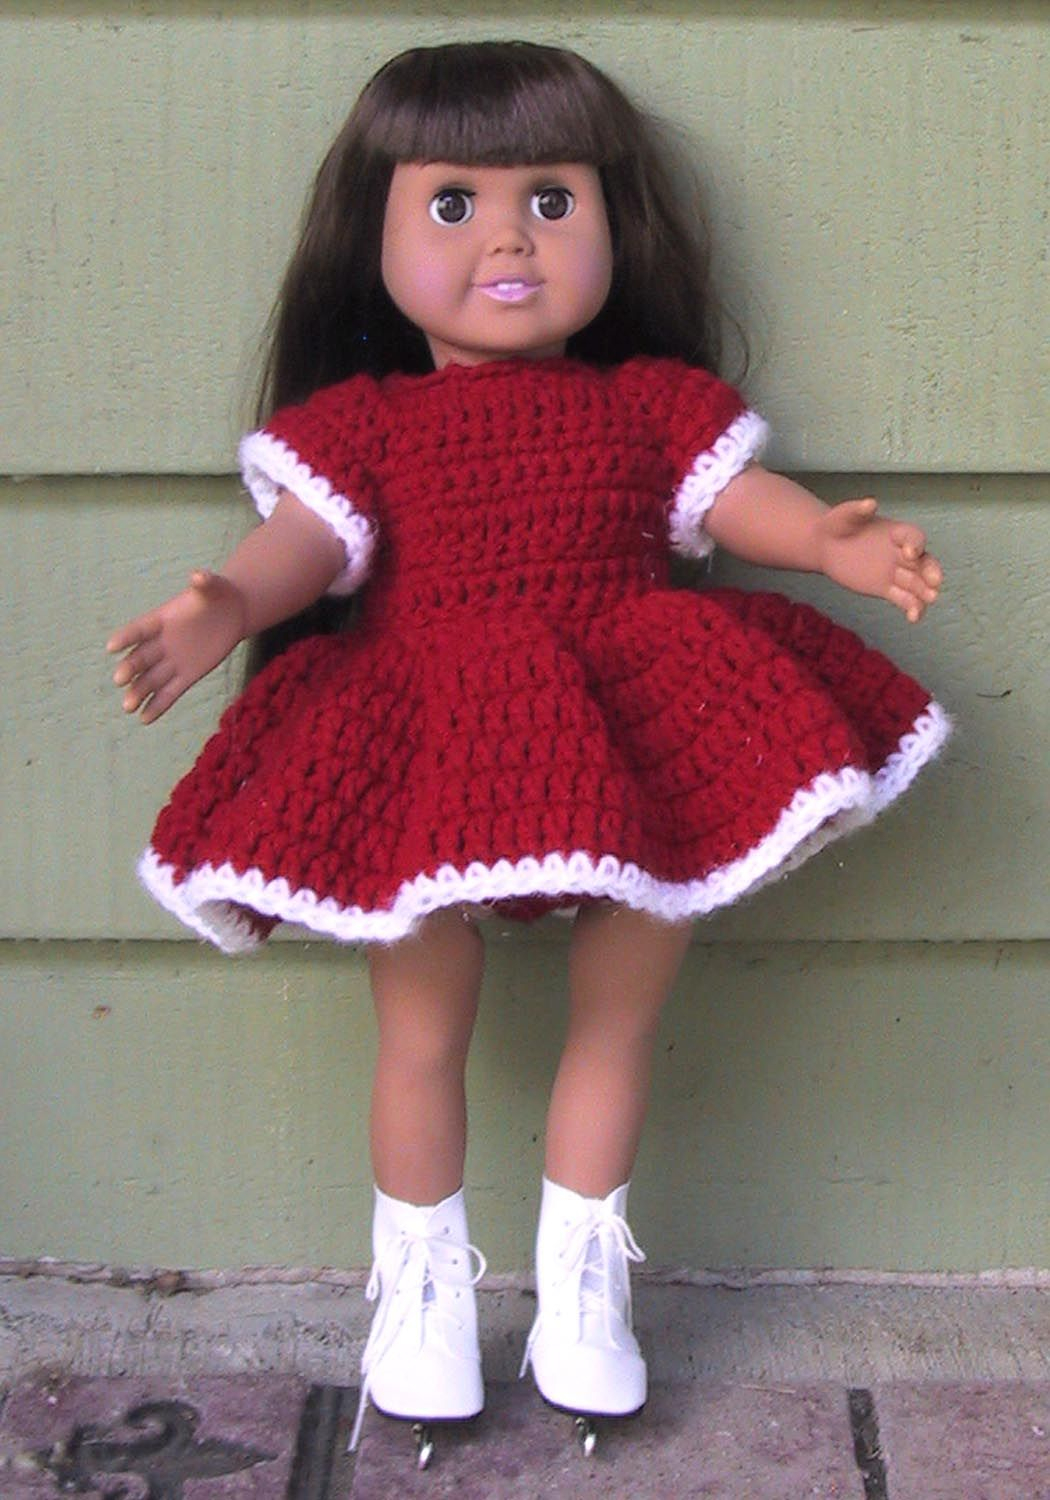 Free Crochet Patterns For American Girl Doll American Girl Dolls And 18 Inch Doll Clothes Free Crochet Patterns